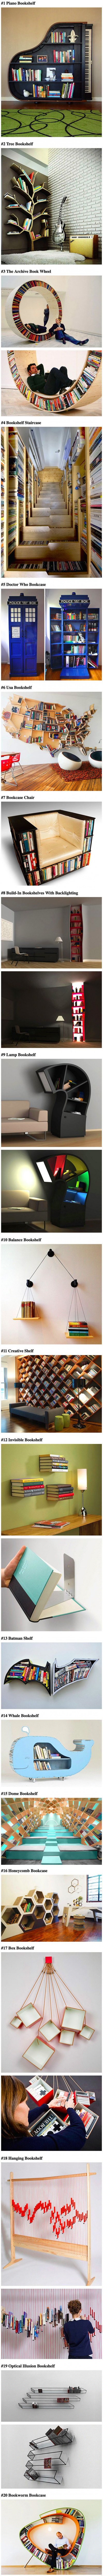 20 Bookshelves That Will Make You Will Provoke You To Read Right Now